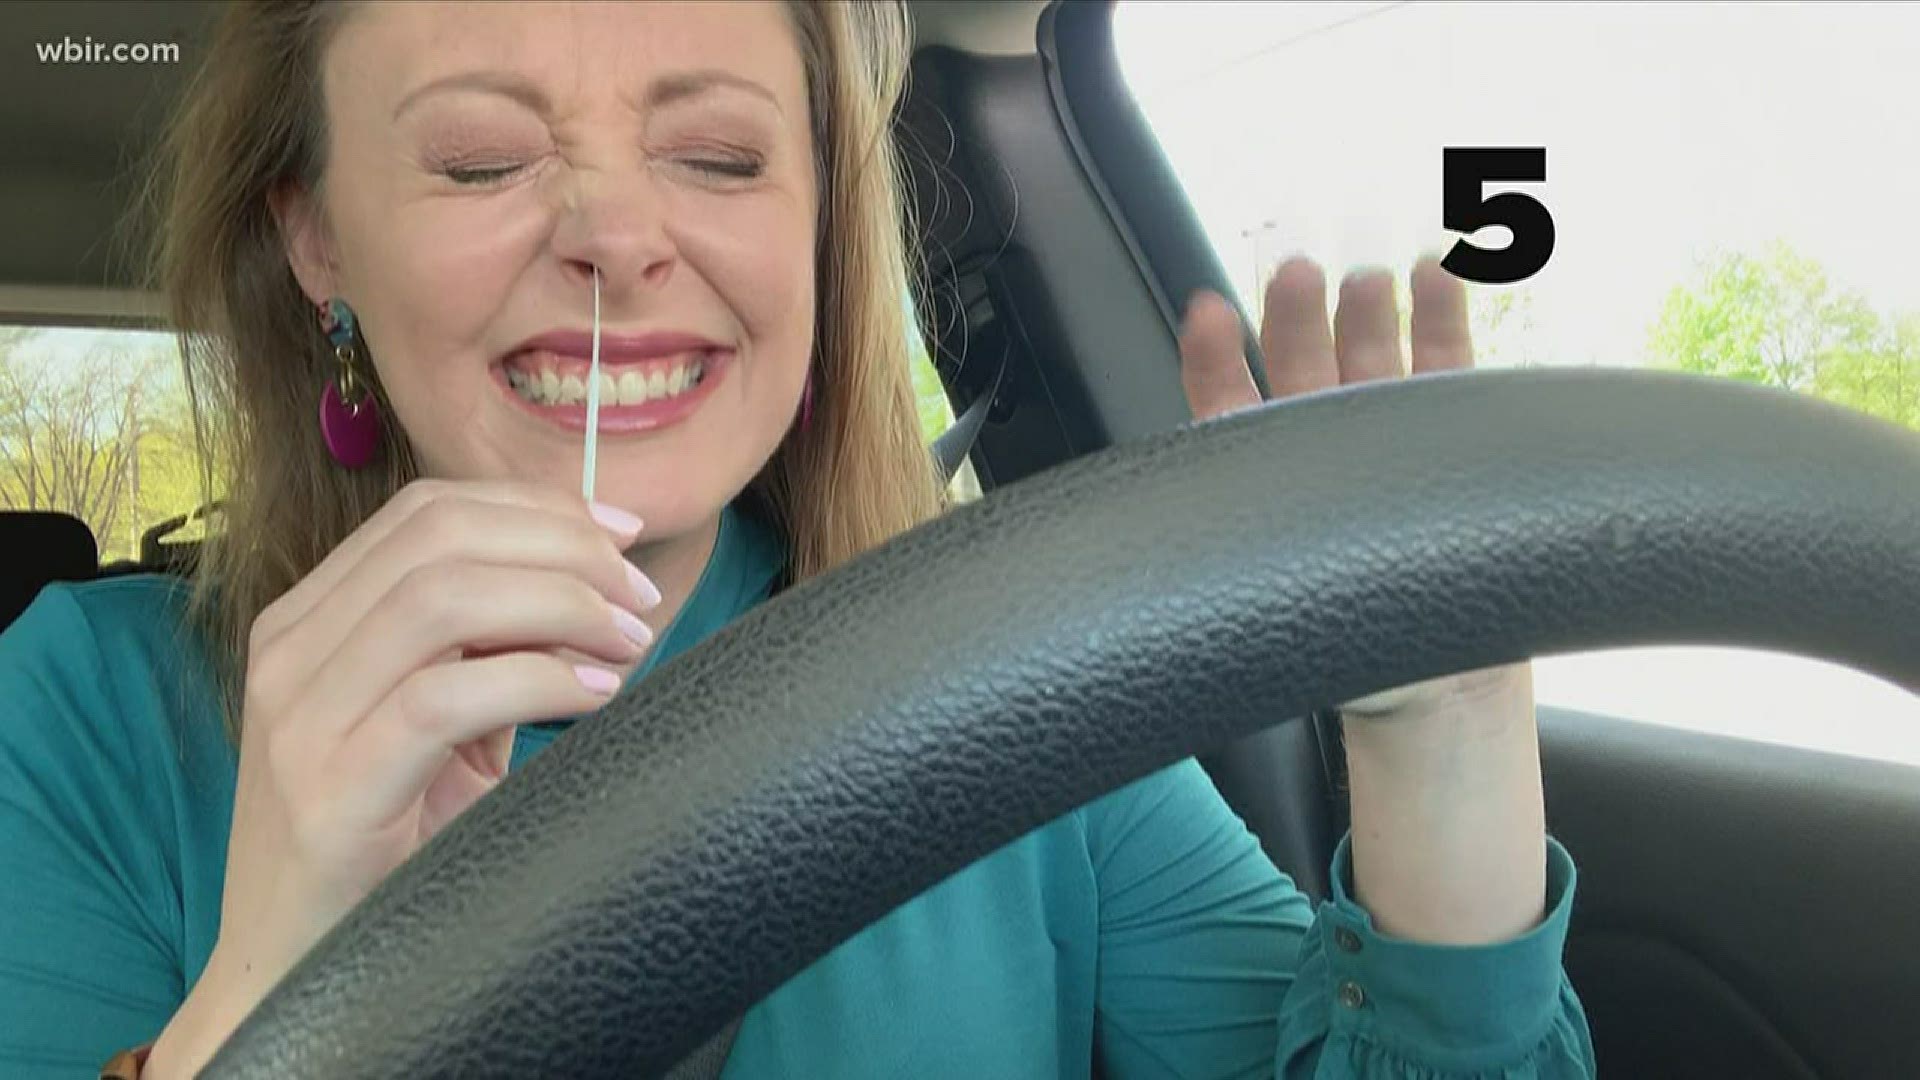 We sent 10News reporter Shannon Smith to find out how drive-thru testing works.